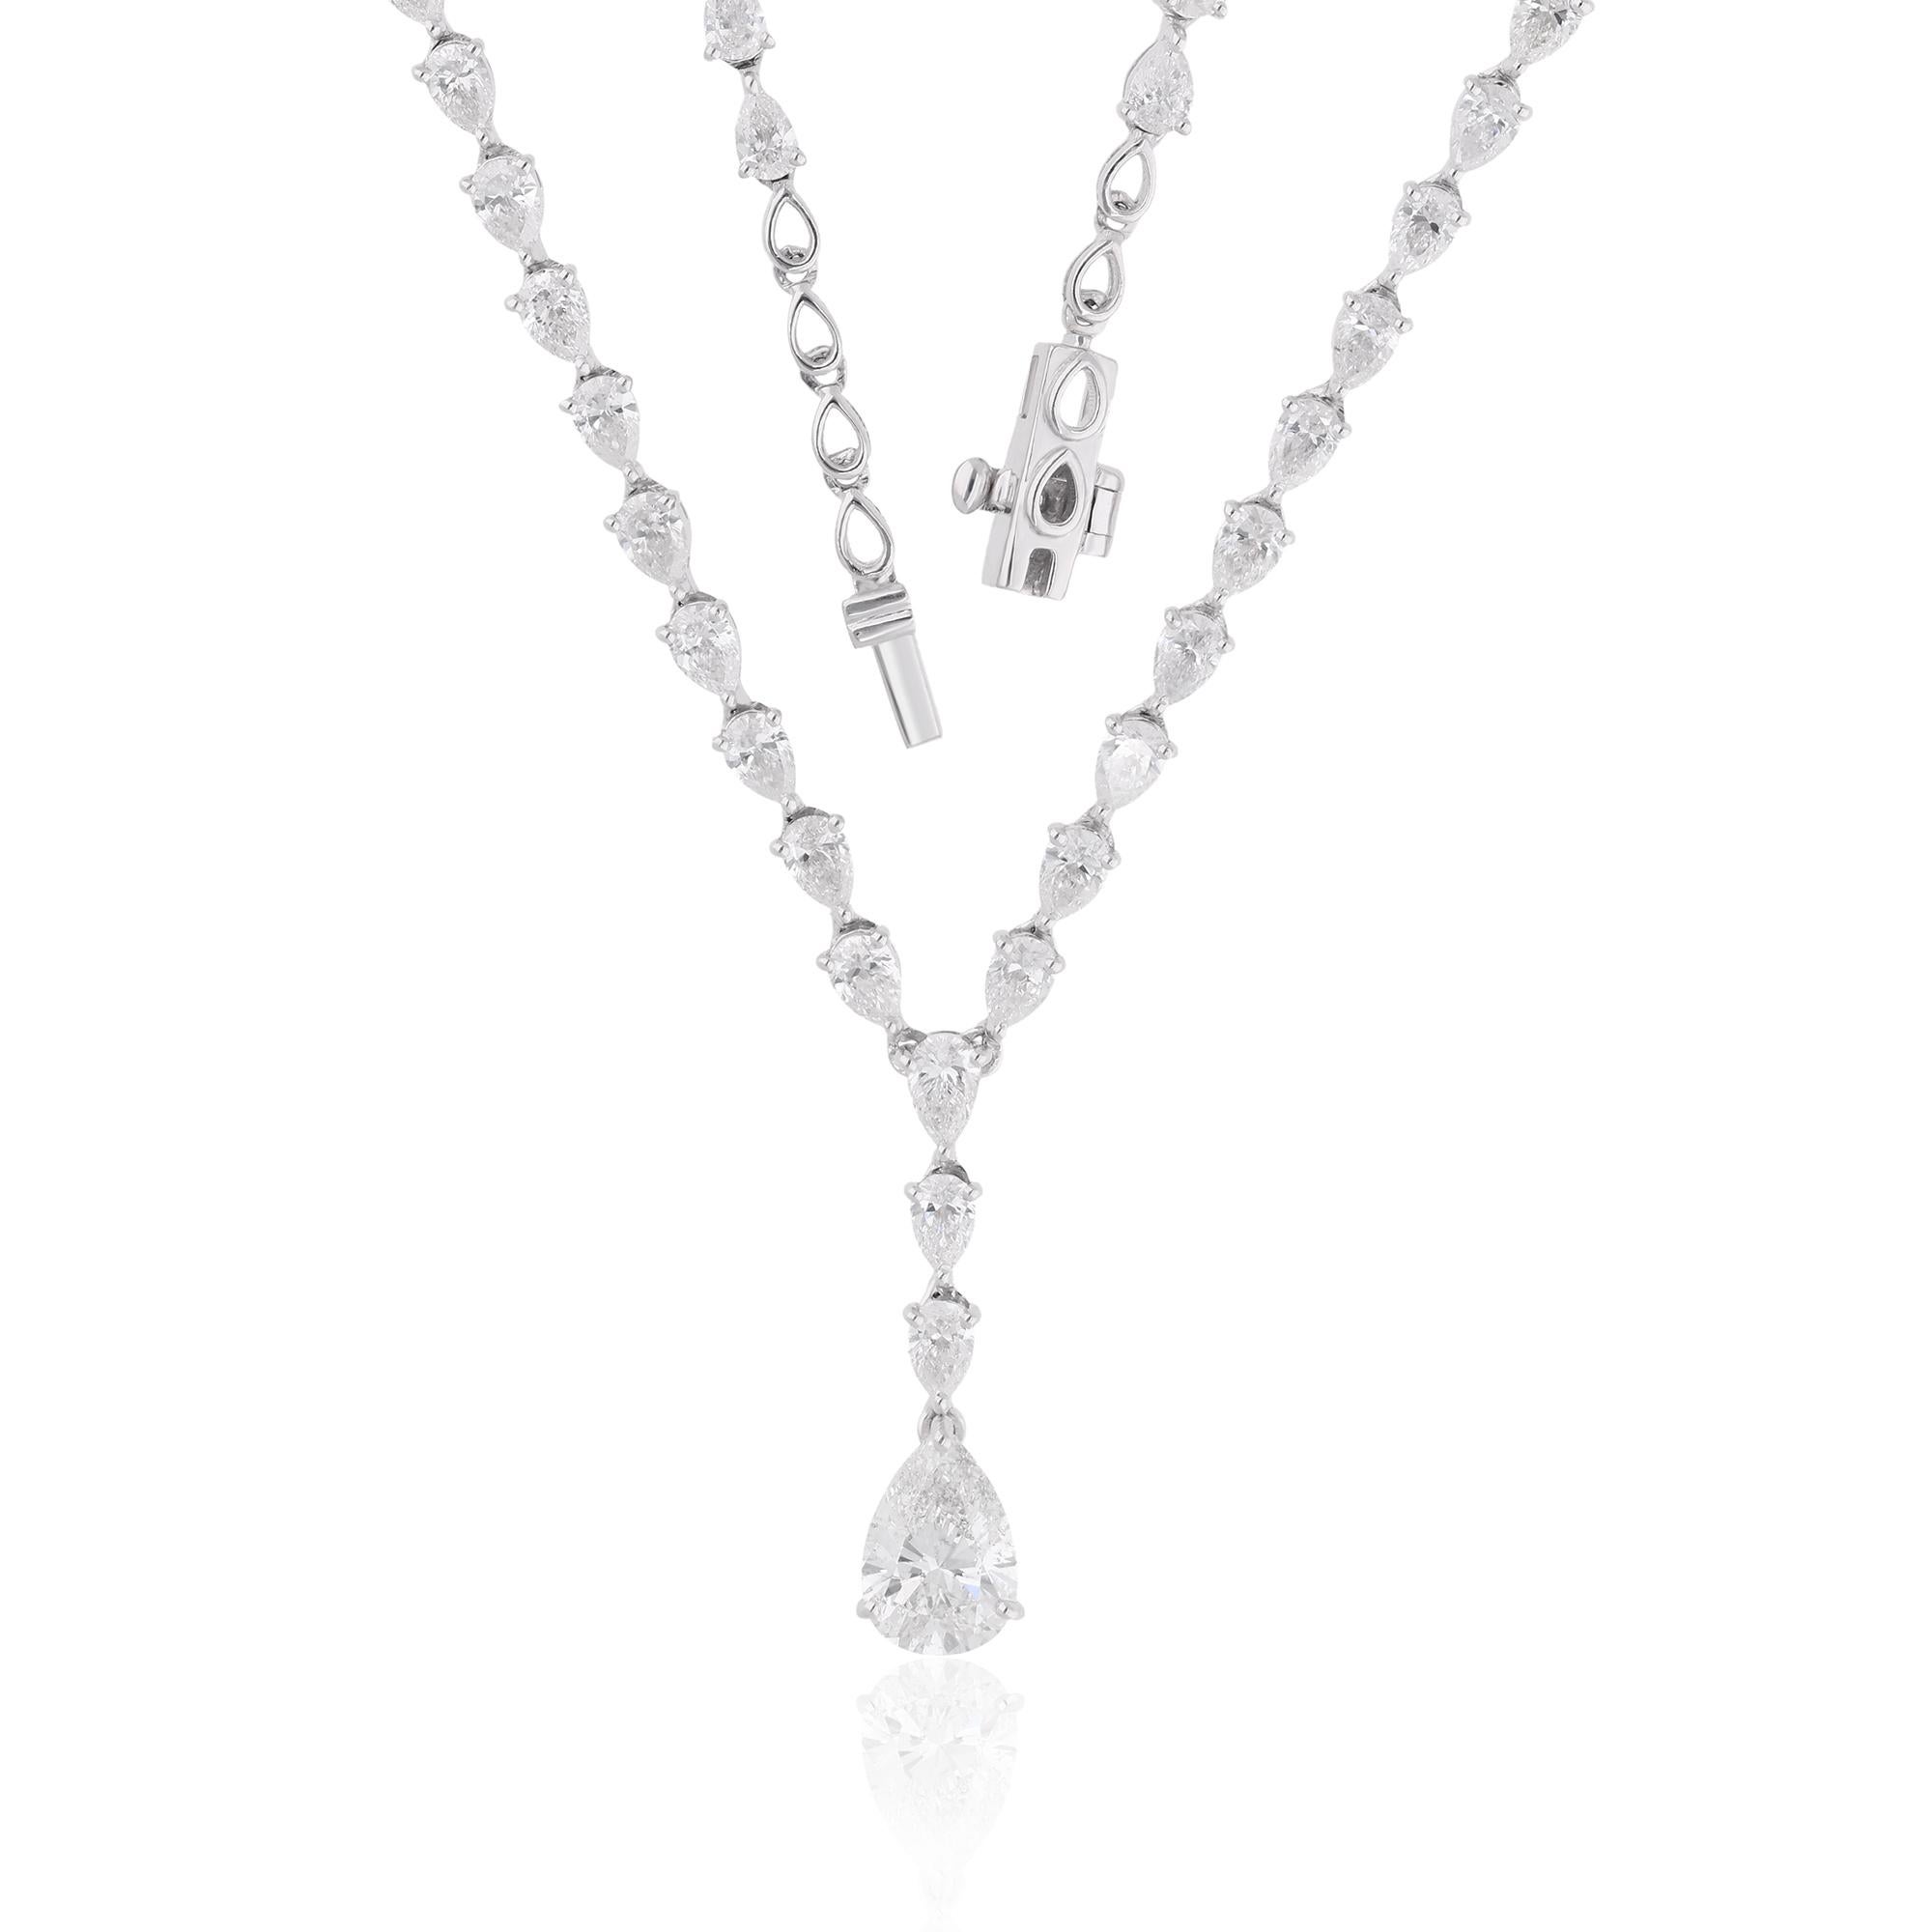 Immerse yourself in the timeless elegance of this Natural Pear Shape Diamond Necklace, meticulously crafted in radiant 14 Karat White Gold. Handmade with precision and care, this exquisite piece of fine jewelry is a celebration of sophistication and